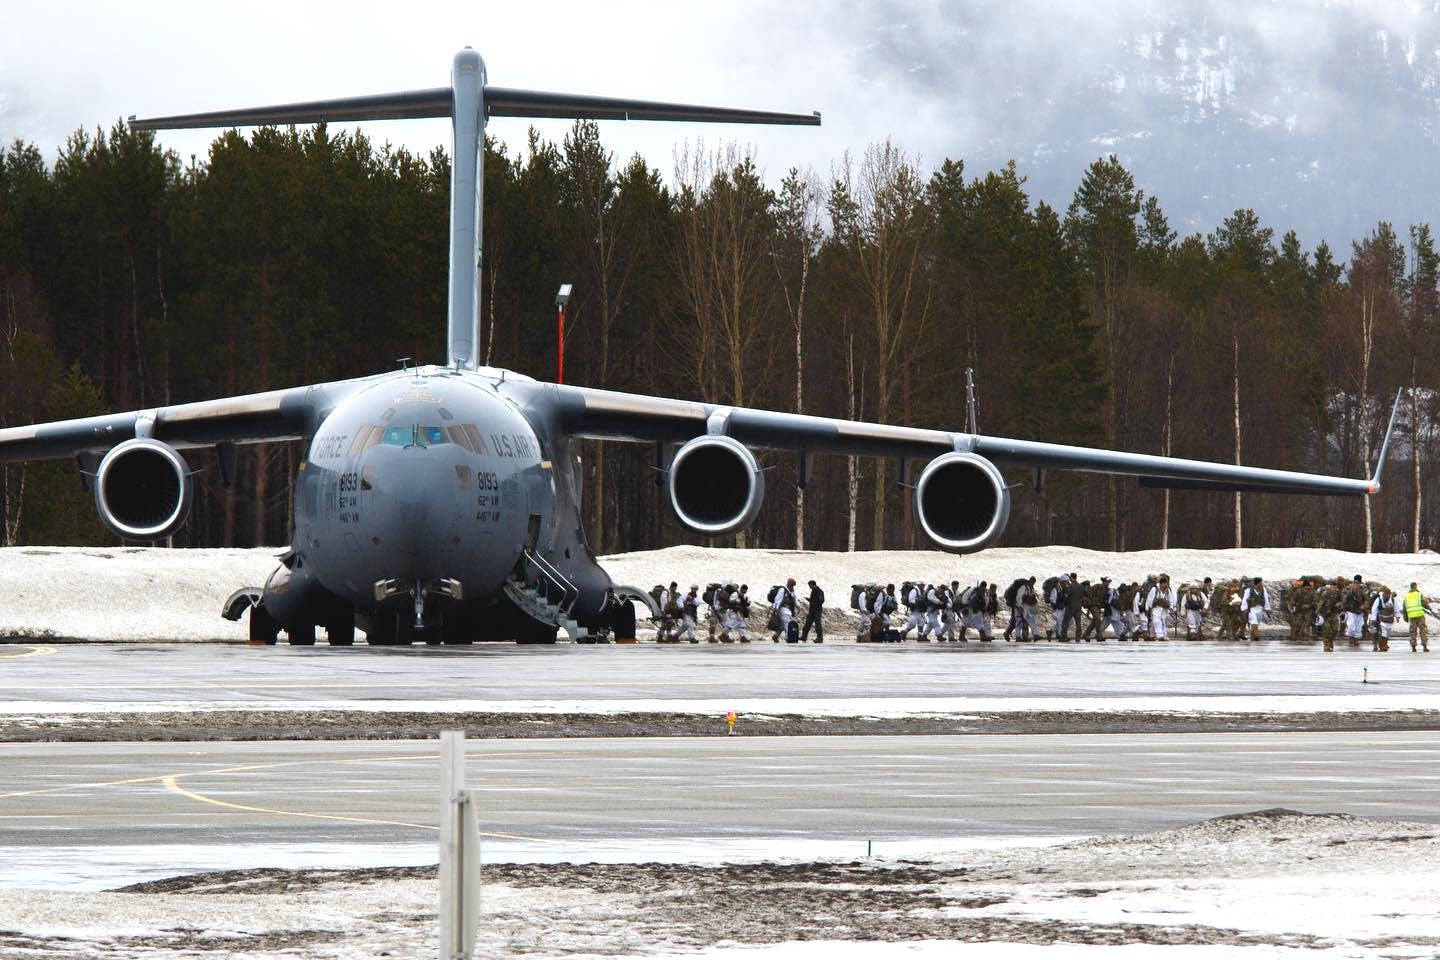 Paratroopers from the US Army's 4th Brigade Combat Team (Airborne), 25th Infantry Division disembark from a US Air Force C-17A at Bardufoss Air Station. <em>Forsvaret</em>